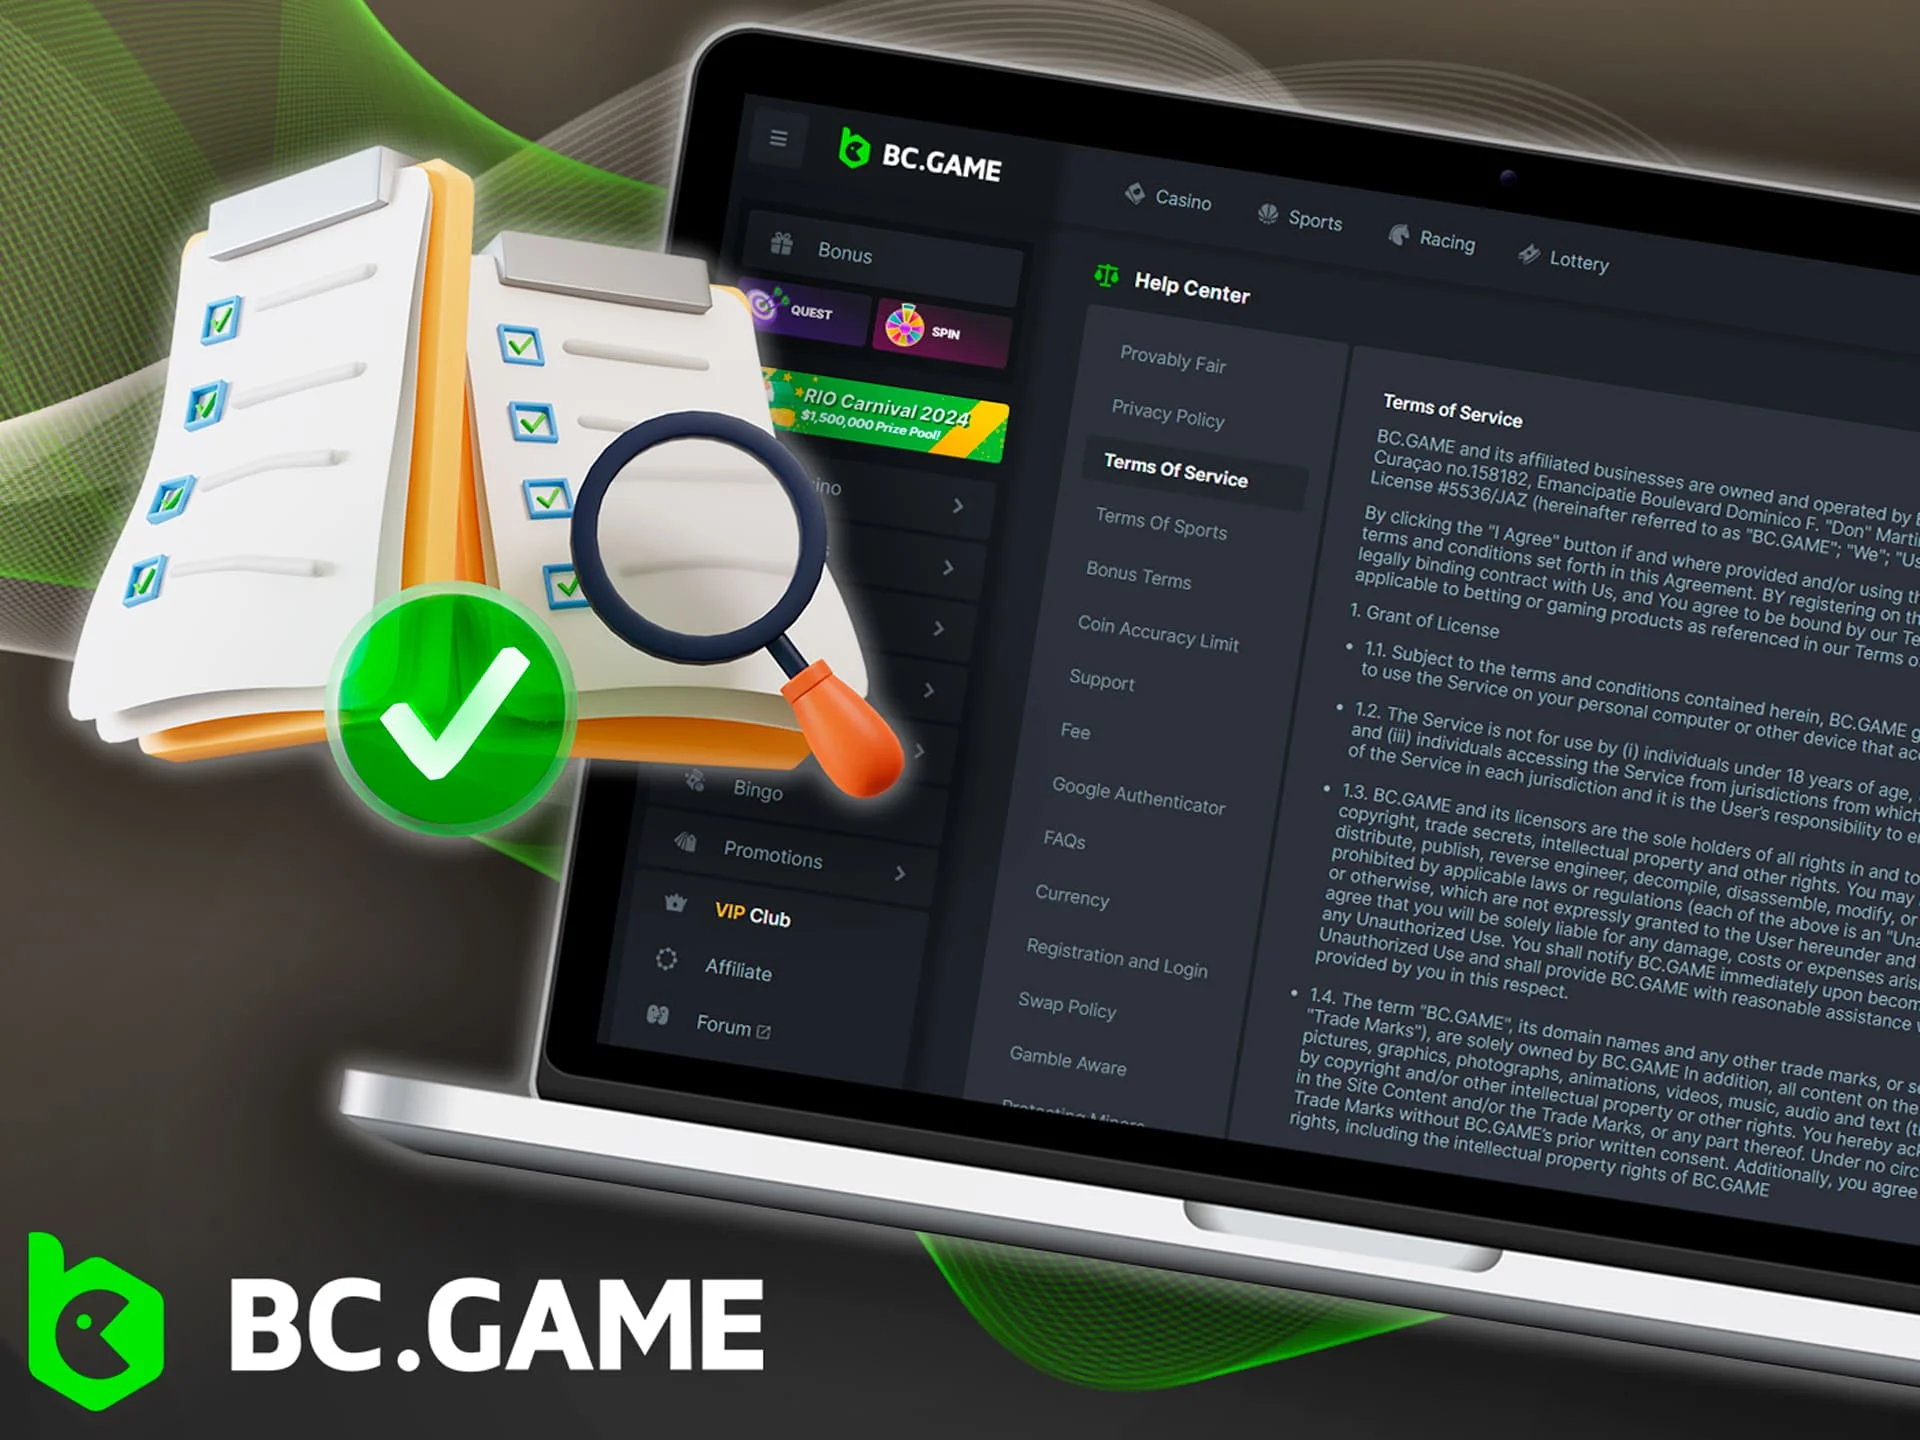 Read the BC Game terms and conditions before you sign up and start playing.